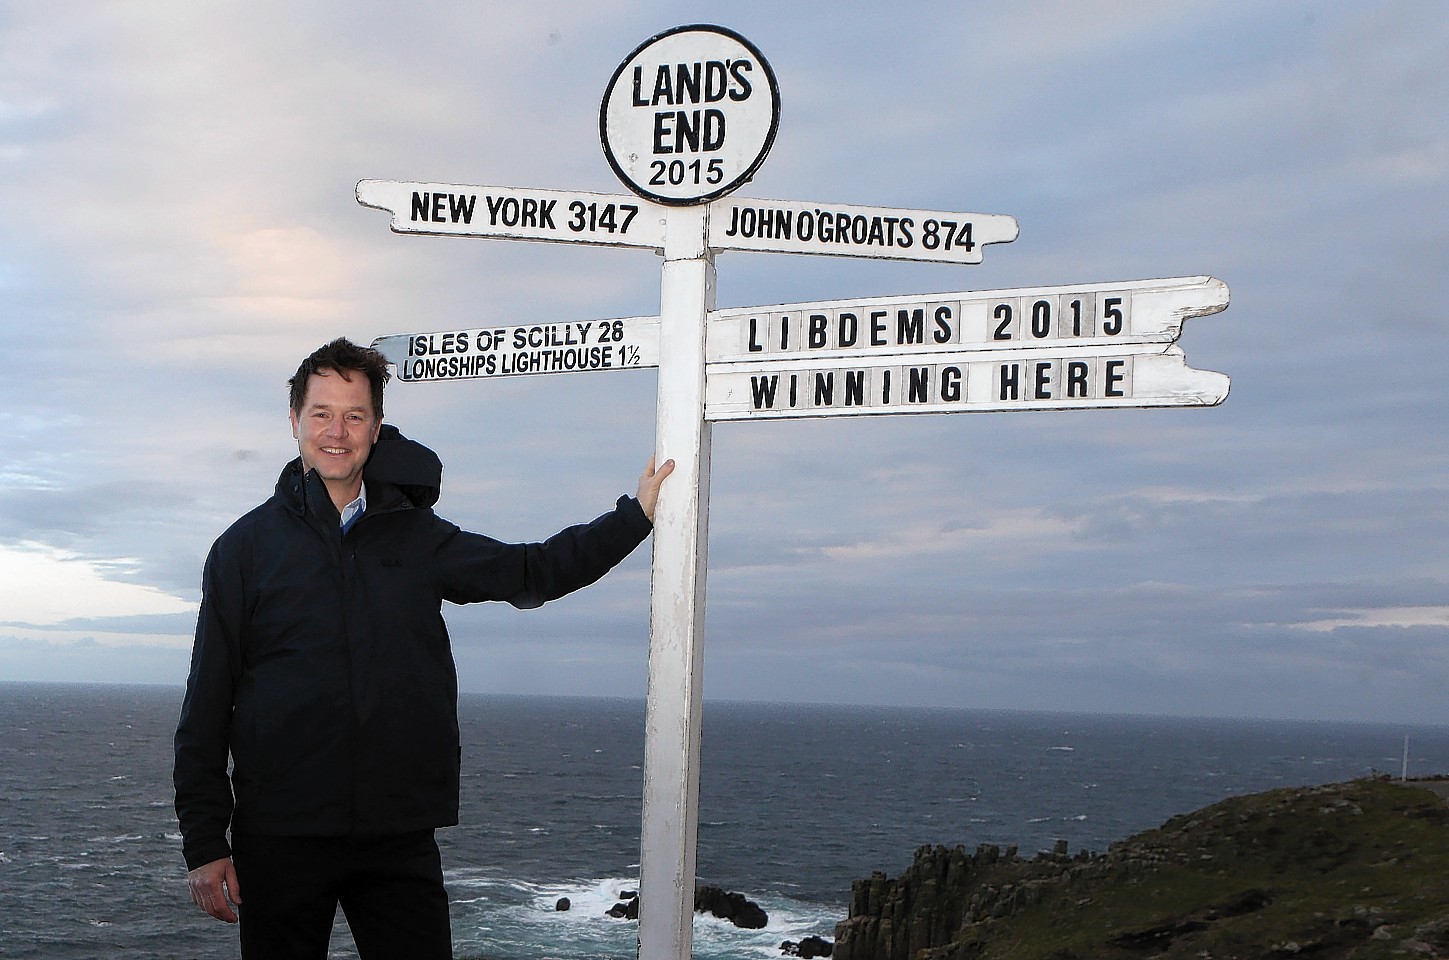 Liberal Democrats Party leader Nick Clegg at Land's End in Cornwall, as he embarks on a Land's End to John O'Groats campaign marathon in a last ditch effort to save as many Liberal Democrat seats as possible at the General Election